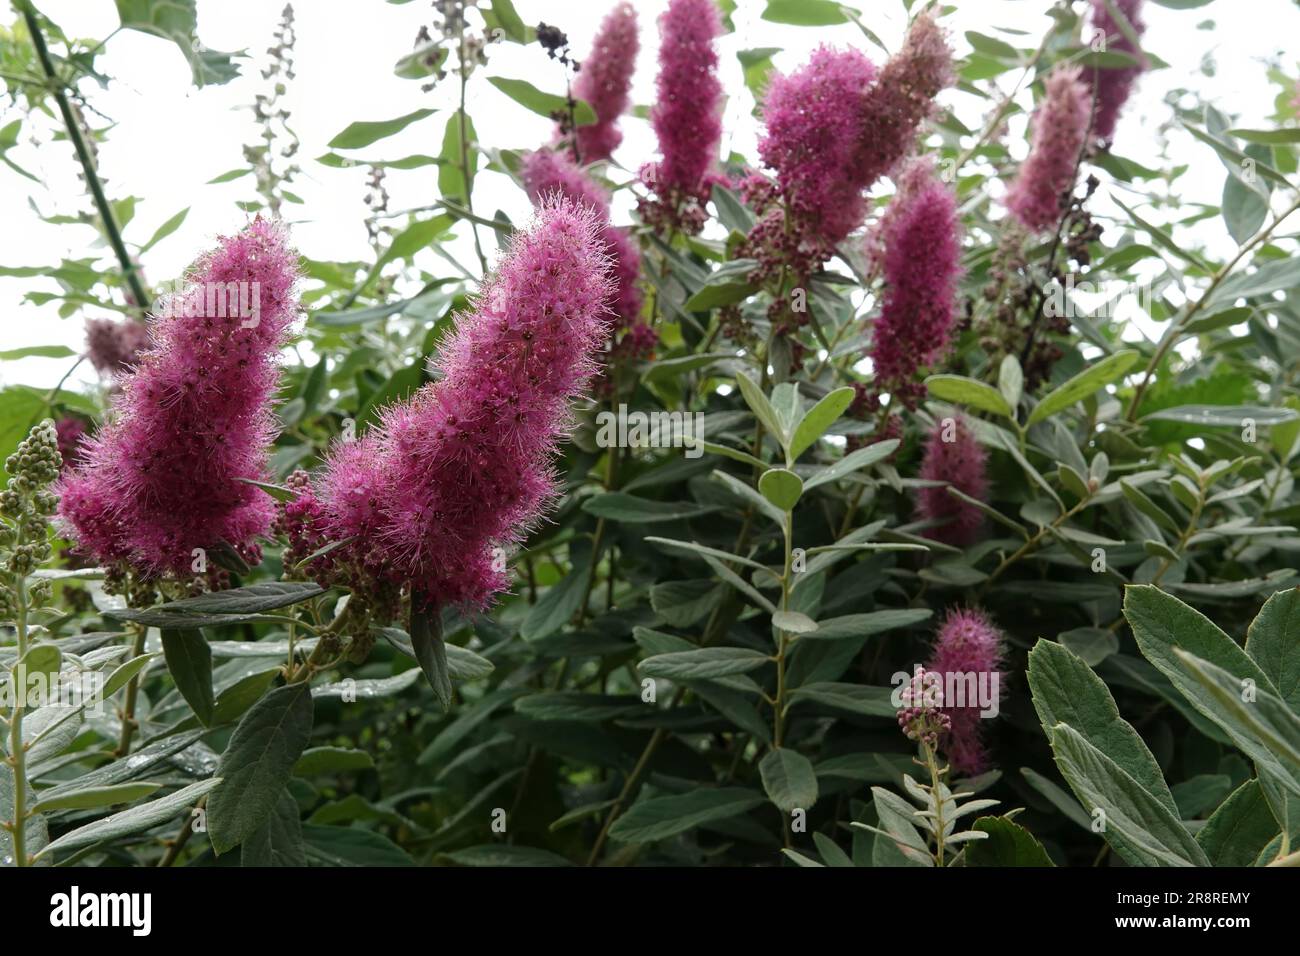 Natural Wide angle closeup on the red to purple flower of the Spiraea douglasii shrub Stock Photo